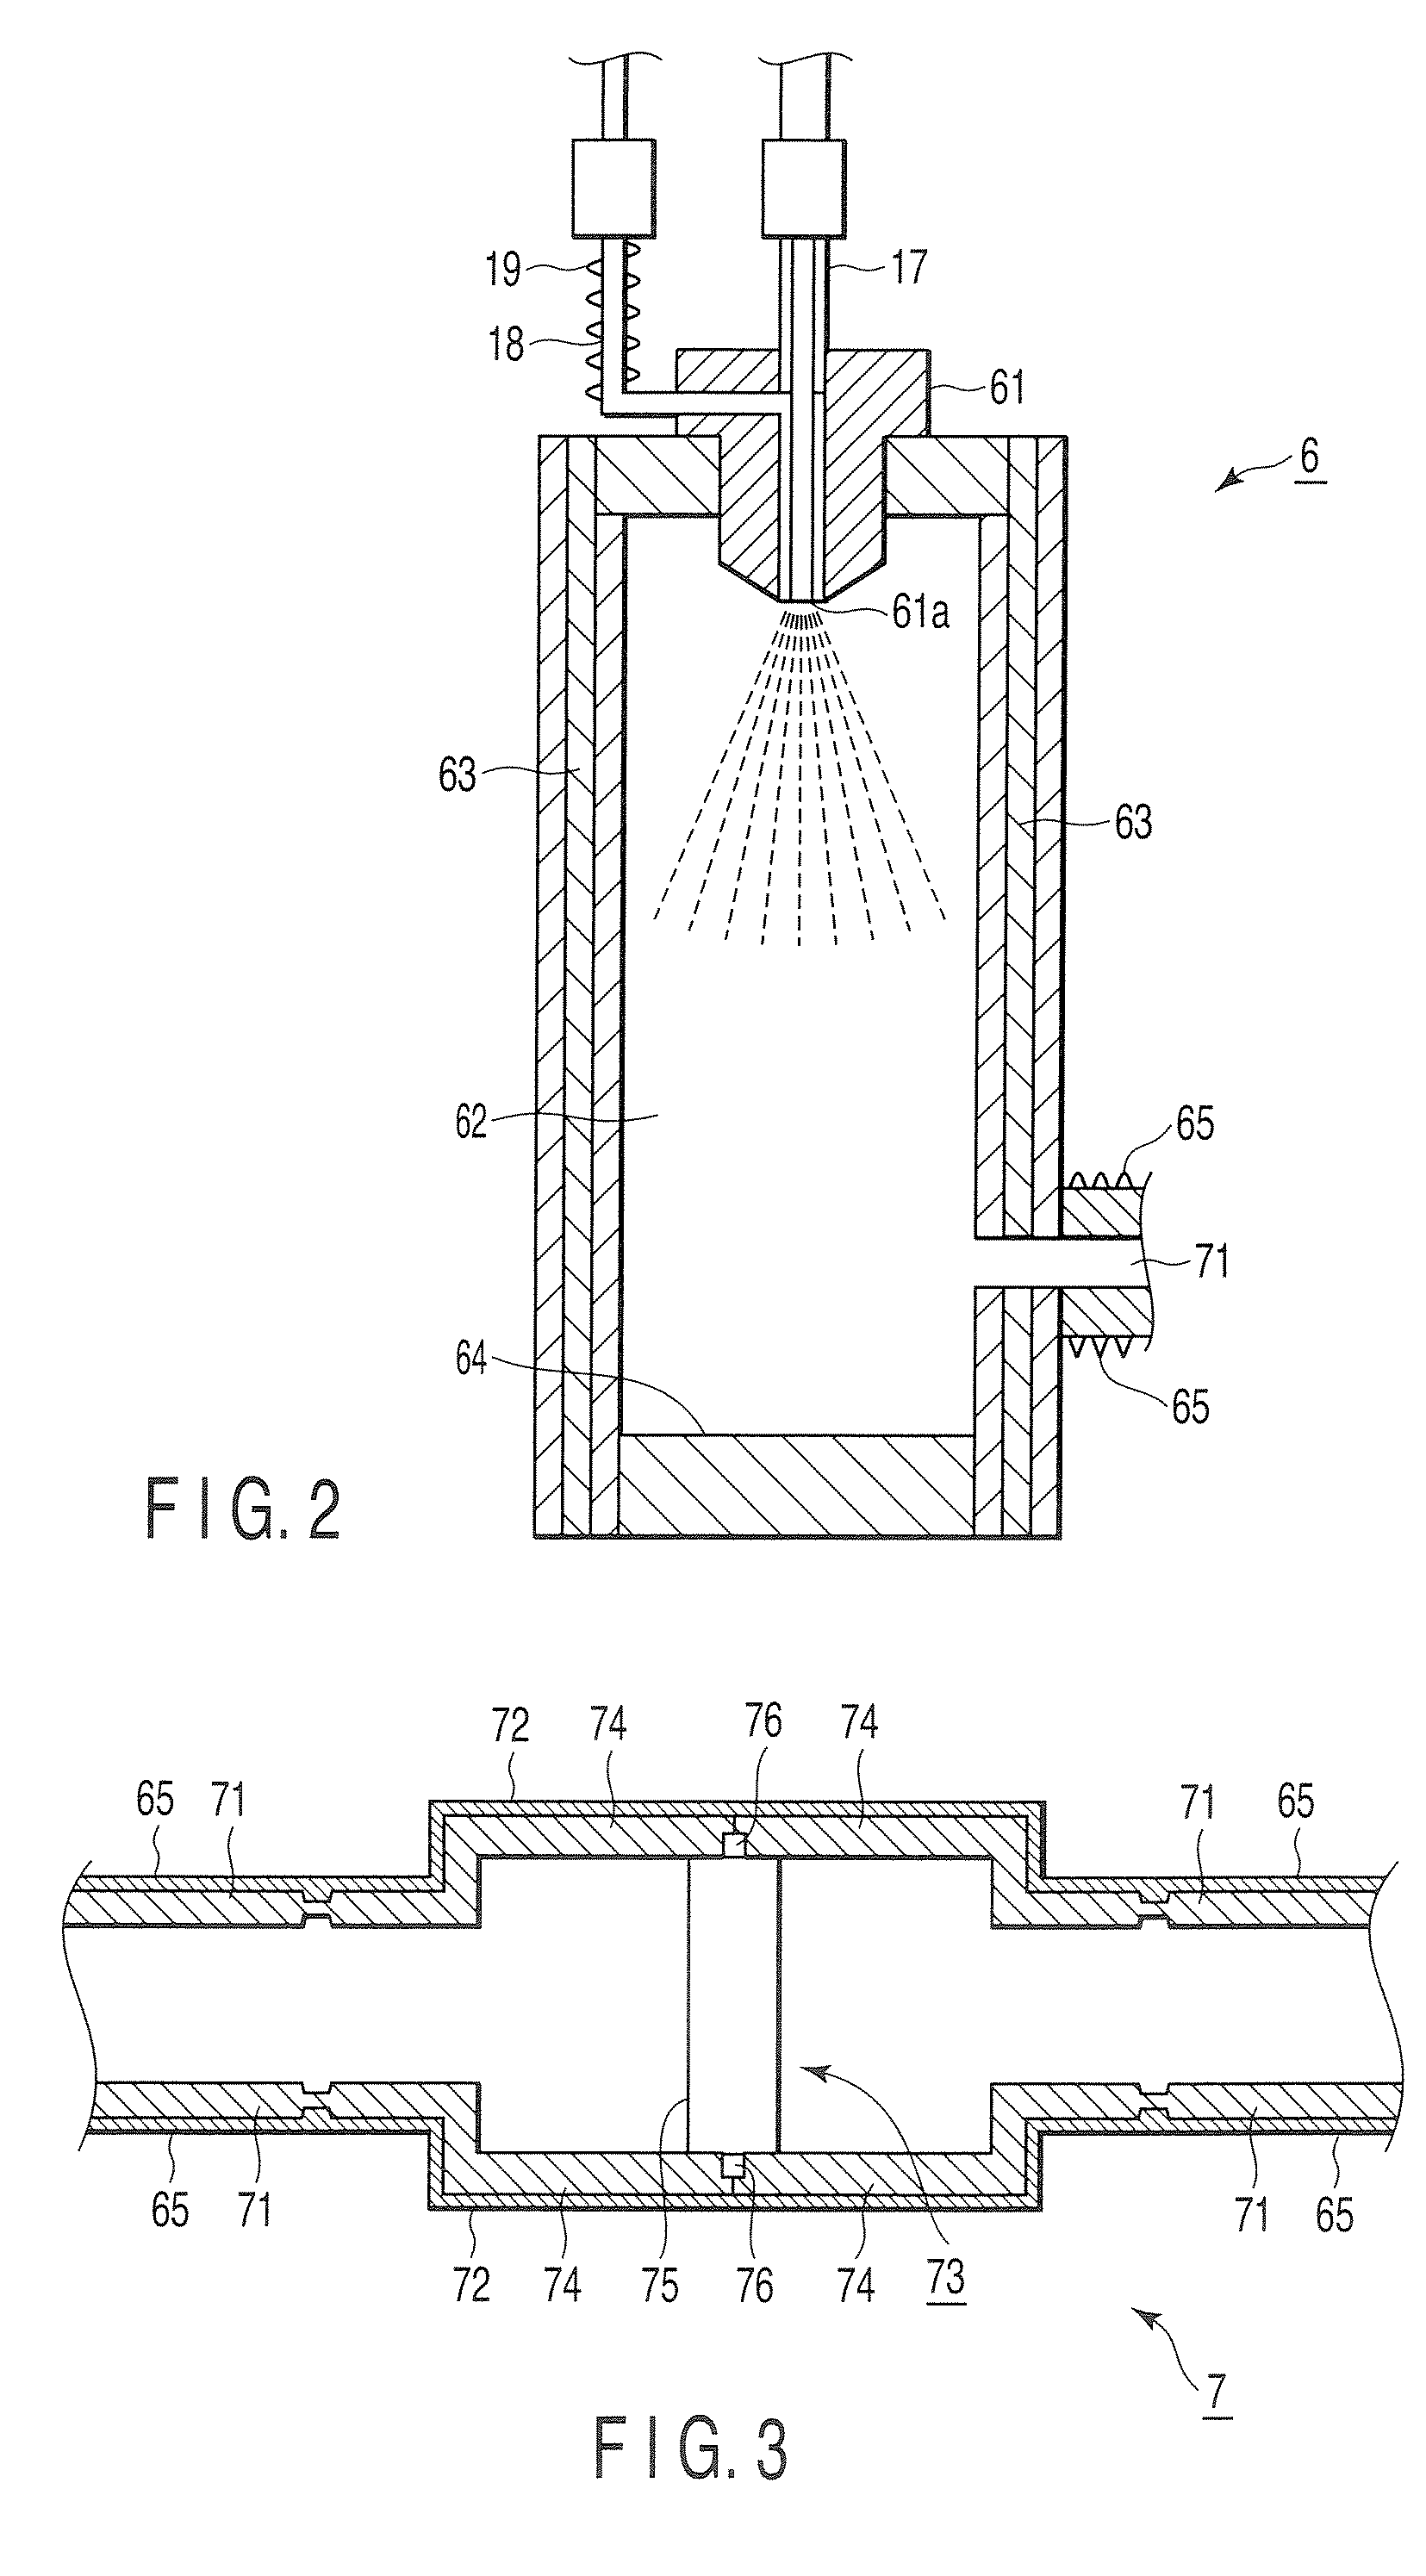 Semiconductor processing system and vaporizer